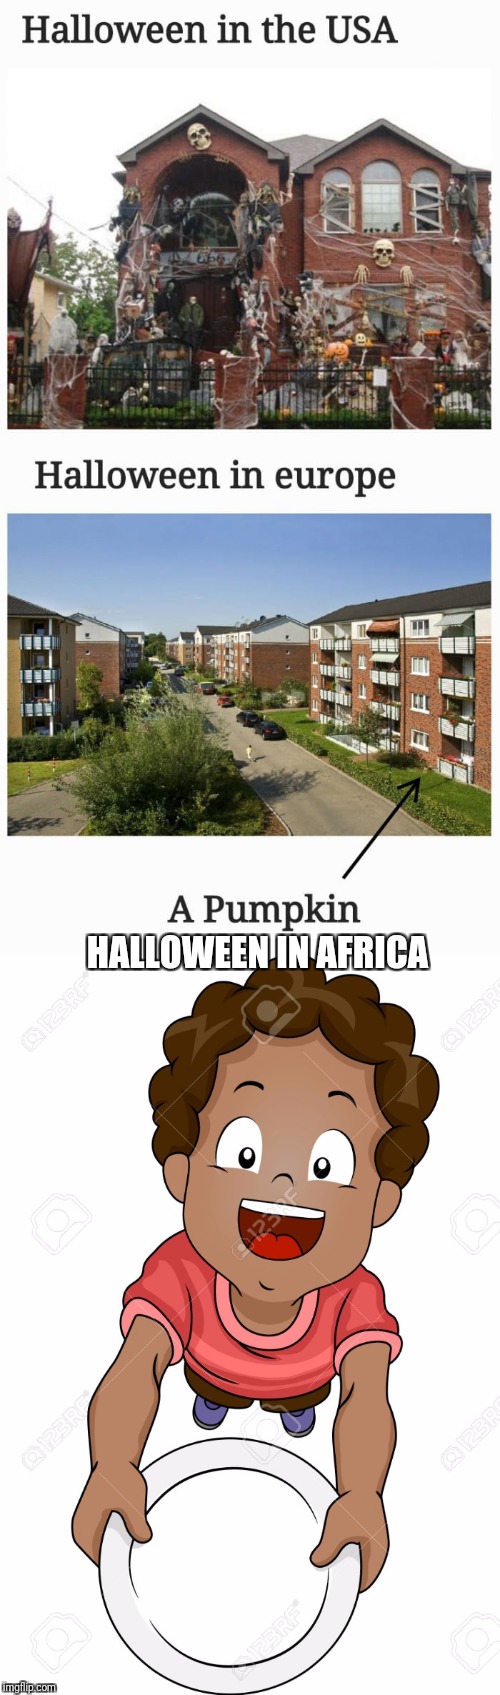 Fixed it (not mine) | HALLOWEEN IN AFRICA | image tagged in there i fixed it | made w/ Imgflip meme maker